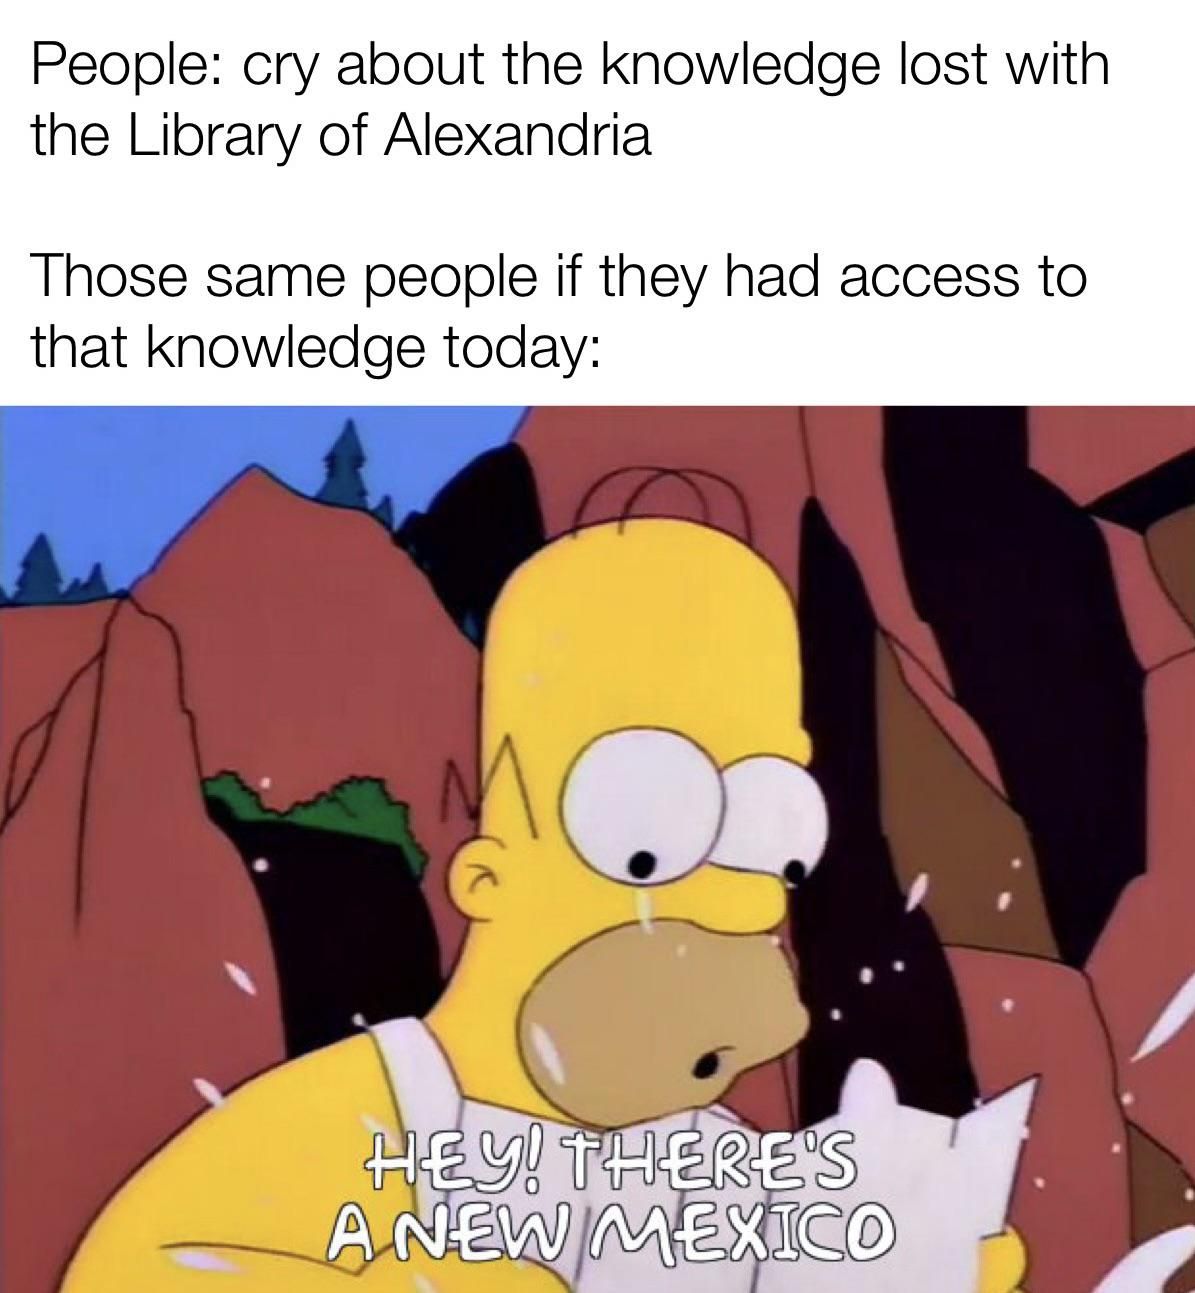 90% of people I know don’t even use libraries